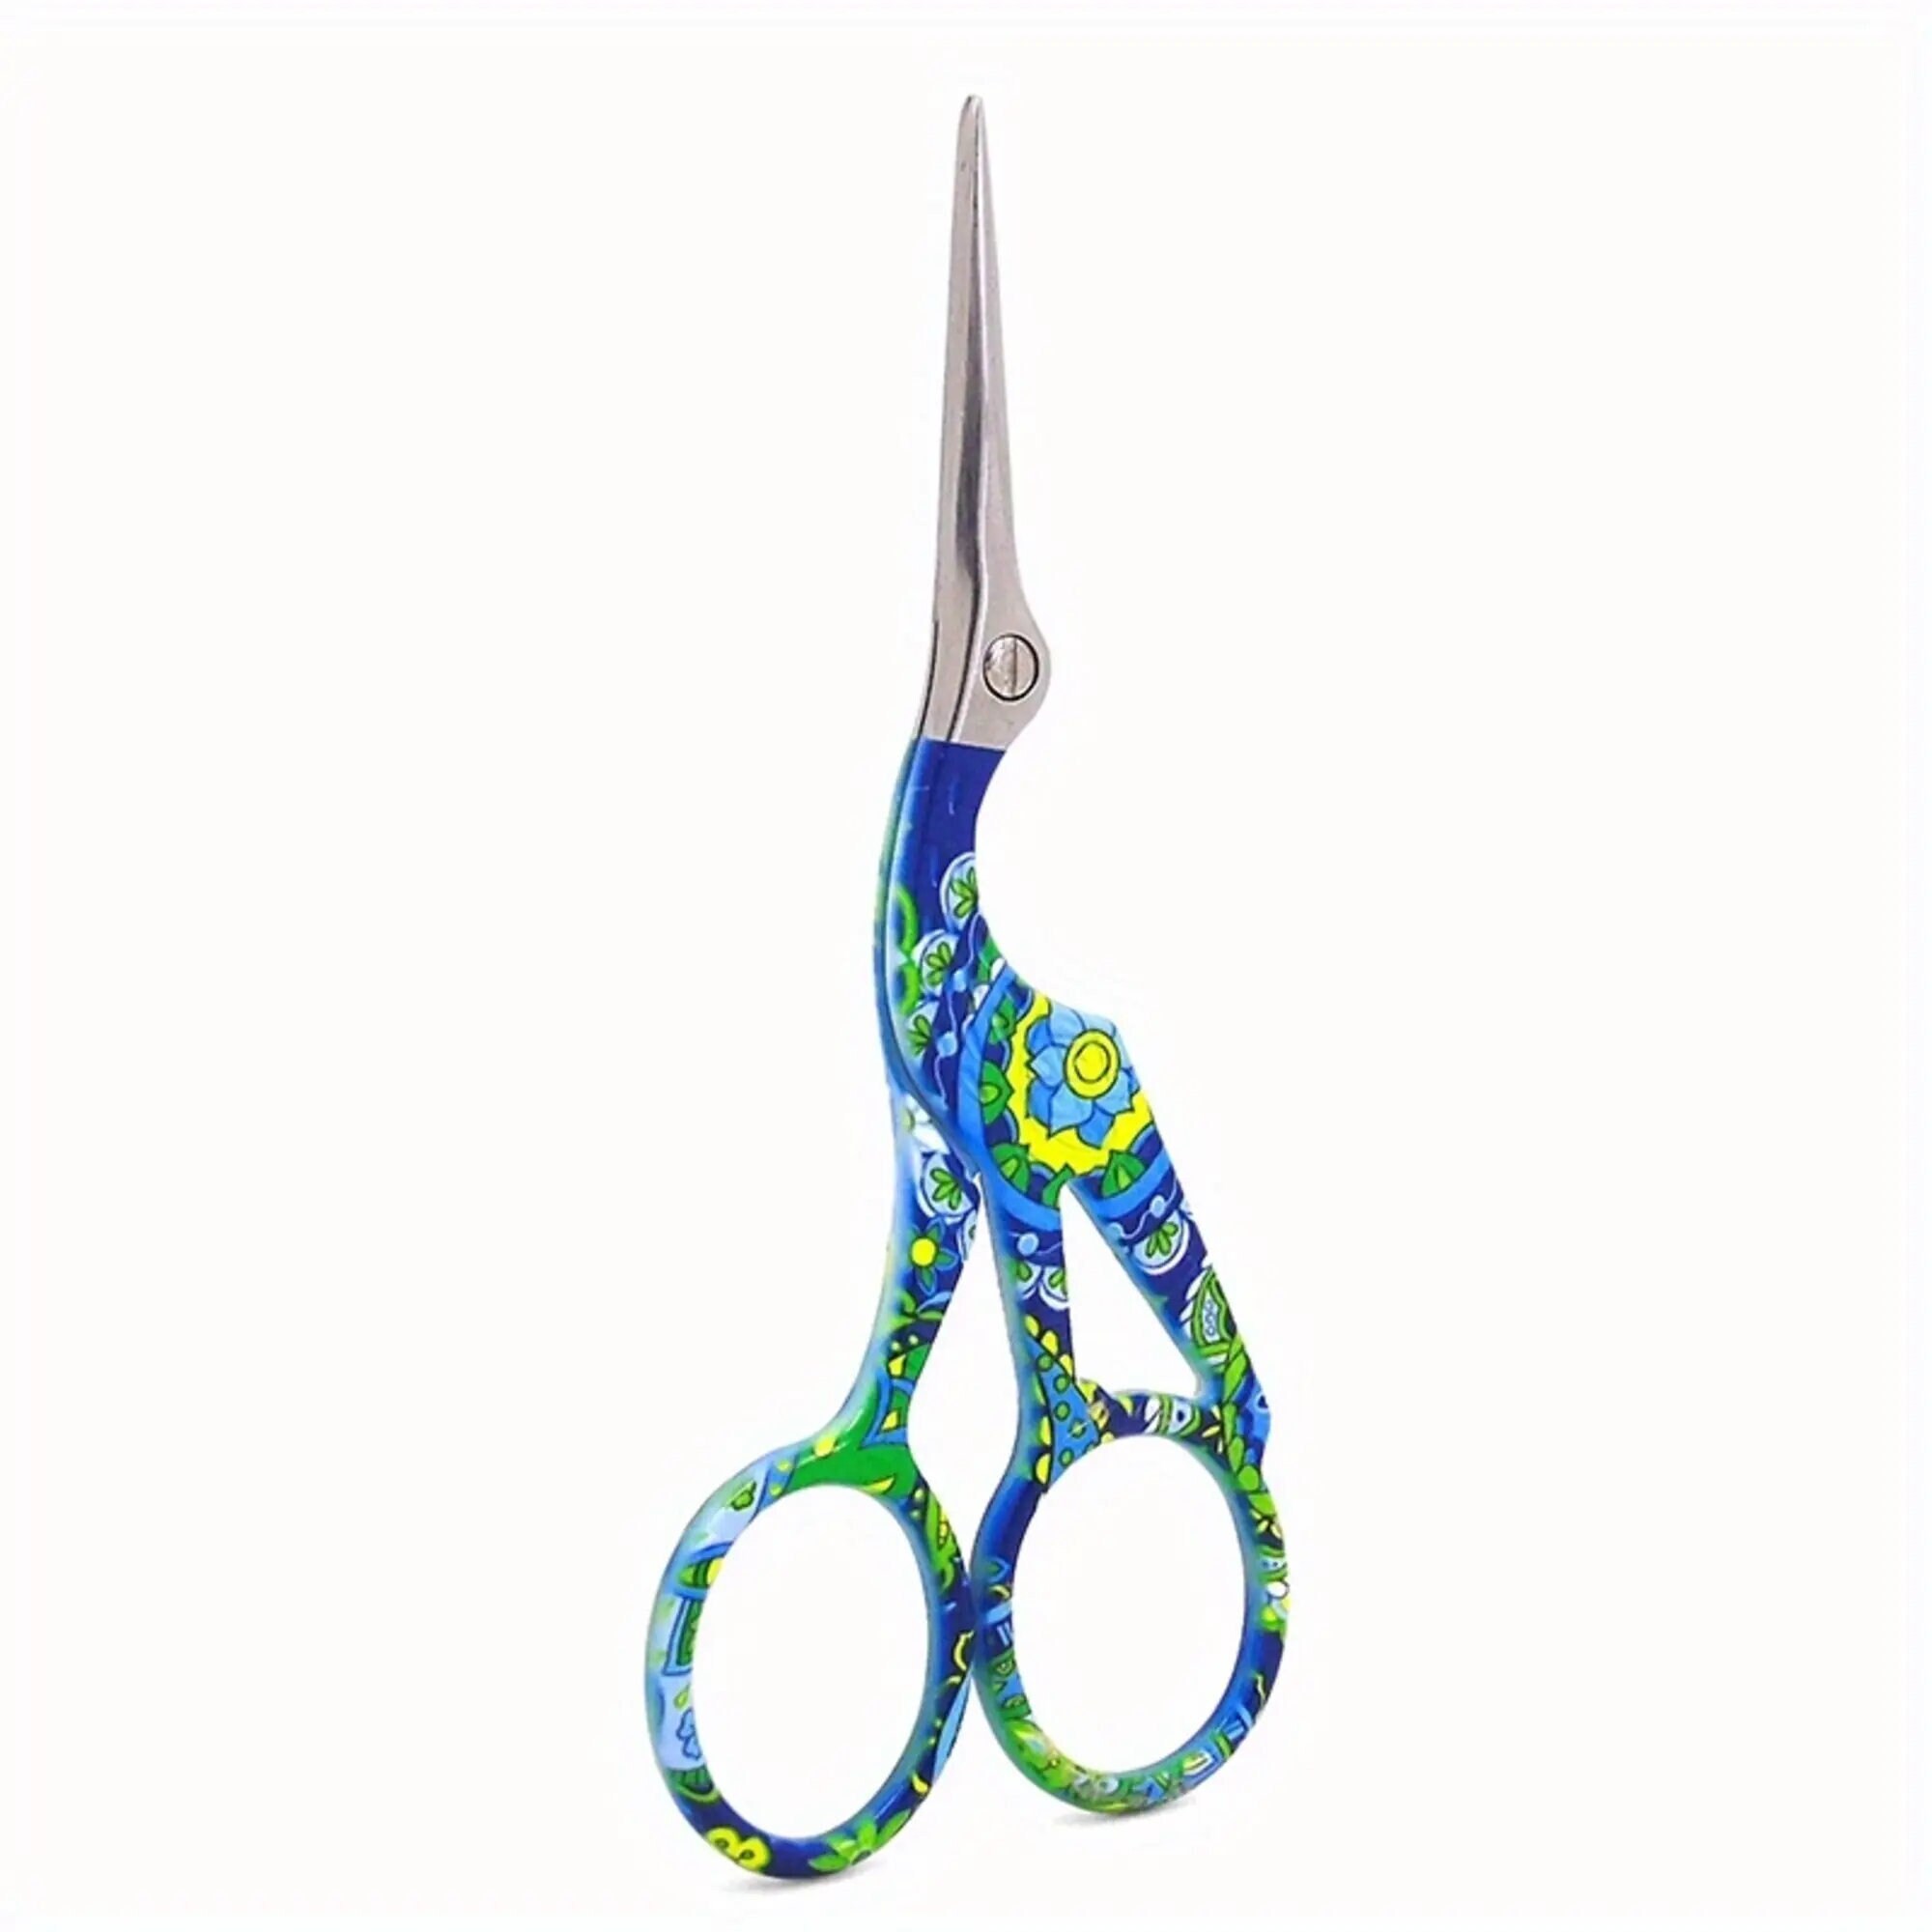  Sewing Embroidery Scissors, 3.5in Embroidery Scissors Crafting  Threading Scissors Cross Stitch Scissors Stainless Steel Small Craft  Scissors for Needlework Artwork Sewing Handicraft(Silver) : Arts, Crafts &  Sewing